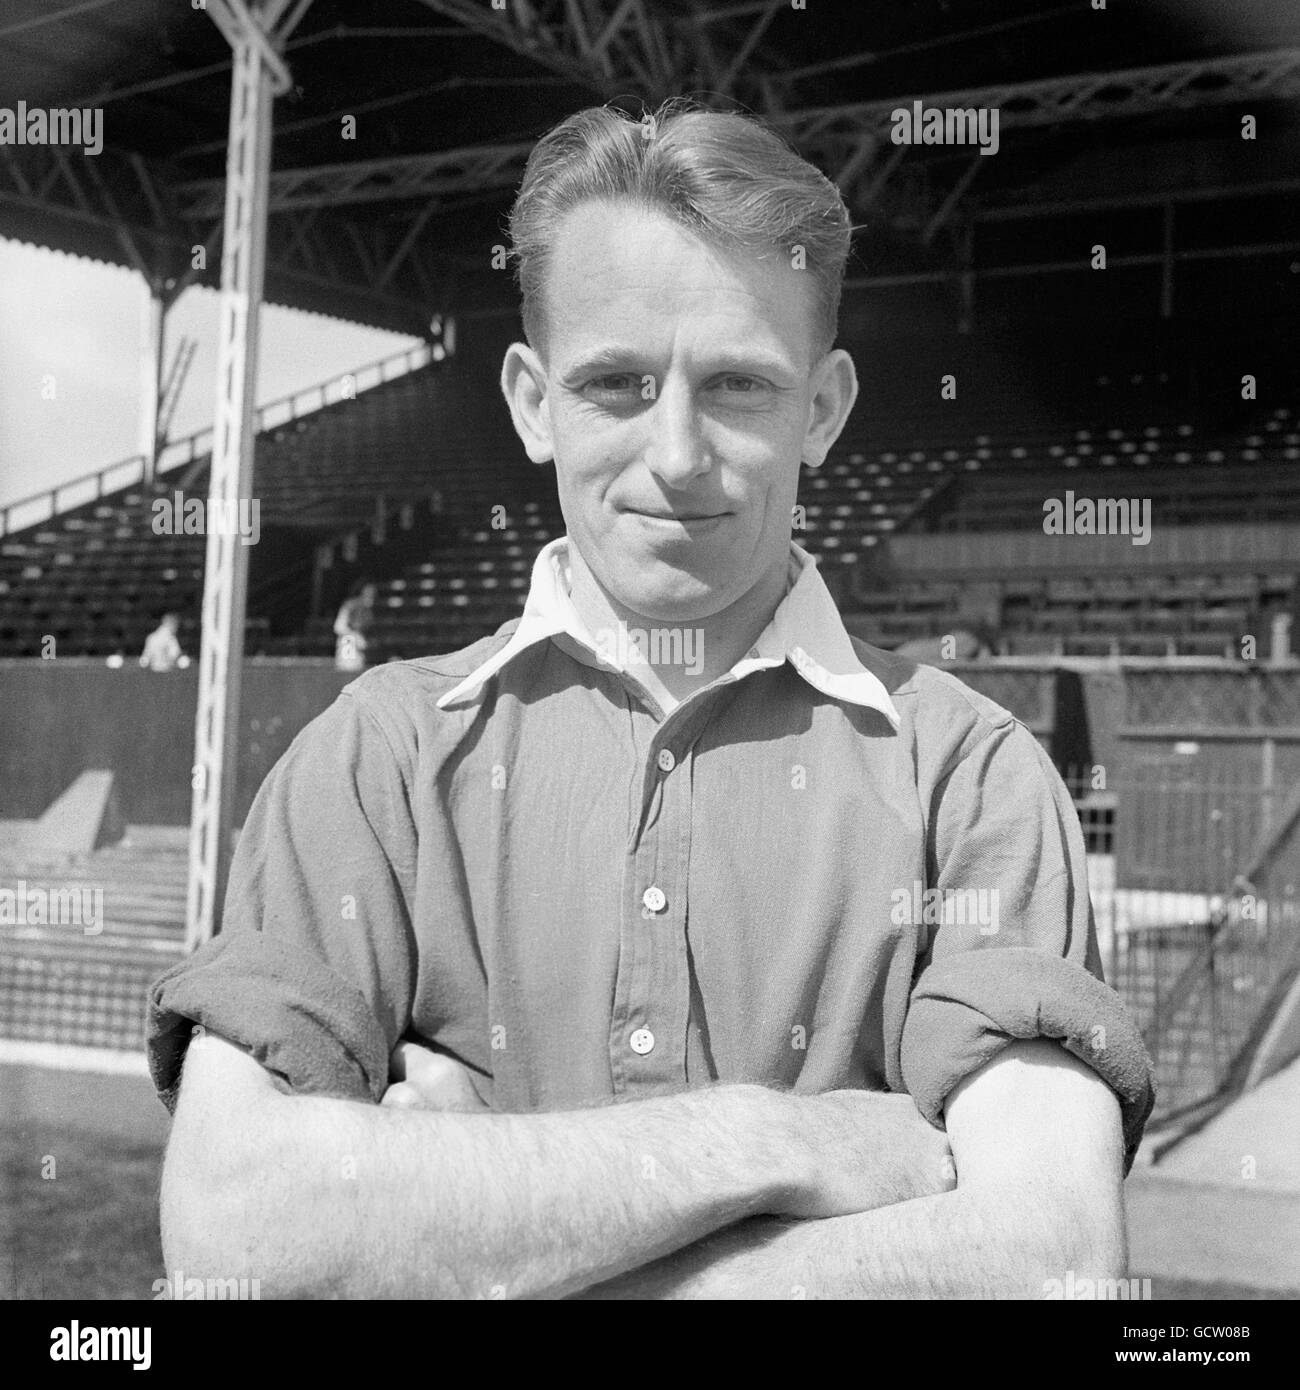 Soccer - League Division One - Charlton Athletic Football Club Photocall - The Valley. Tommy Lumley, Charlton Athletic FC Stock Photo